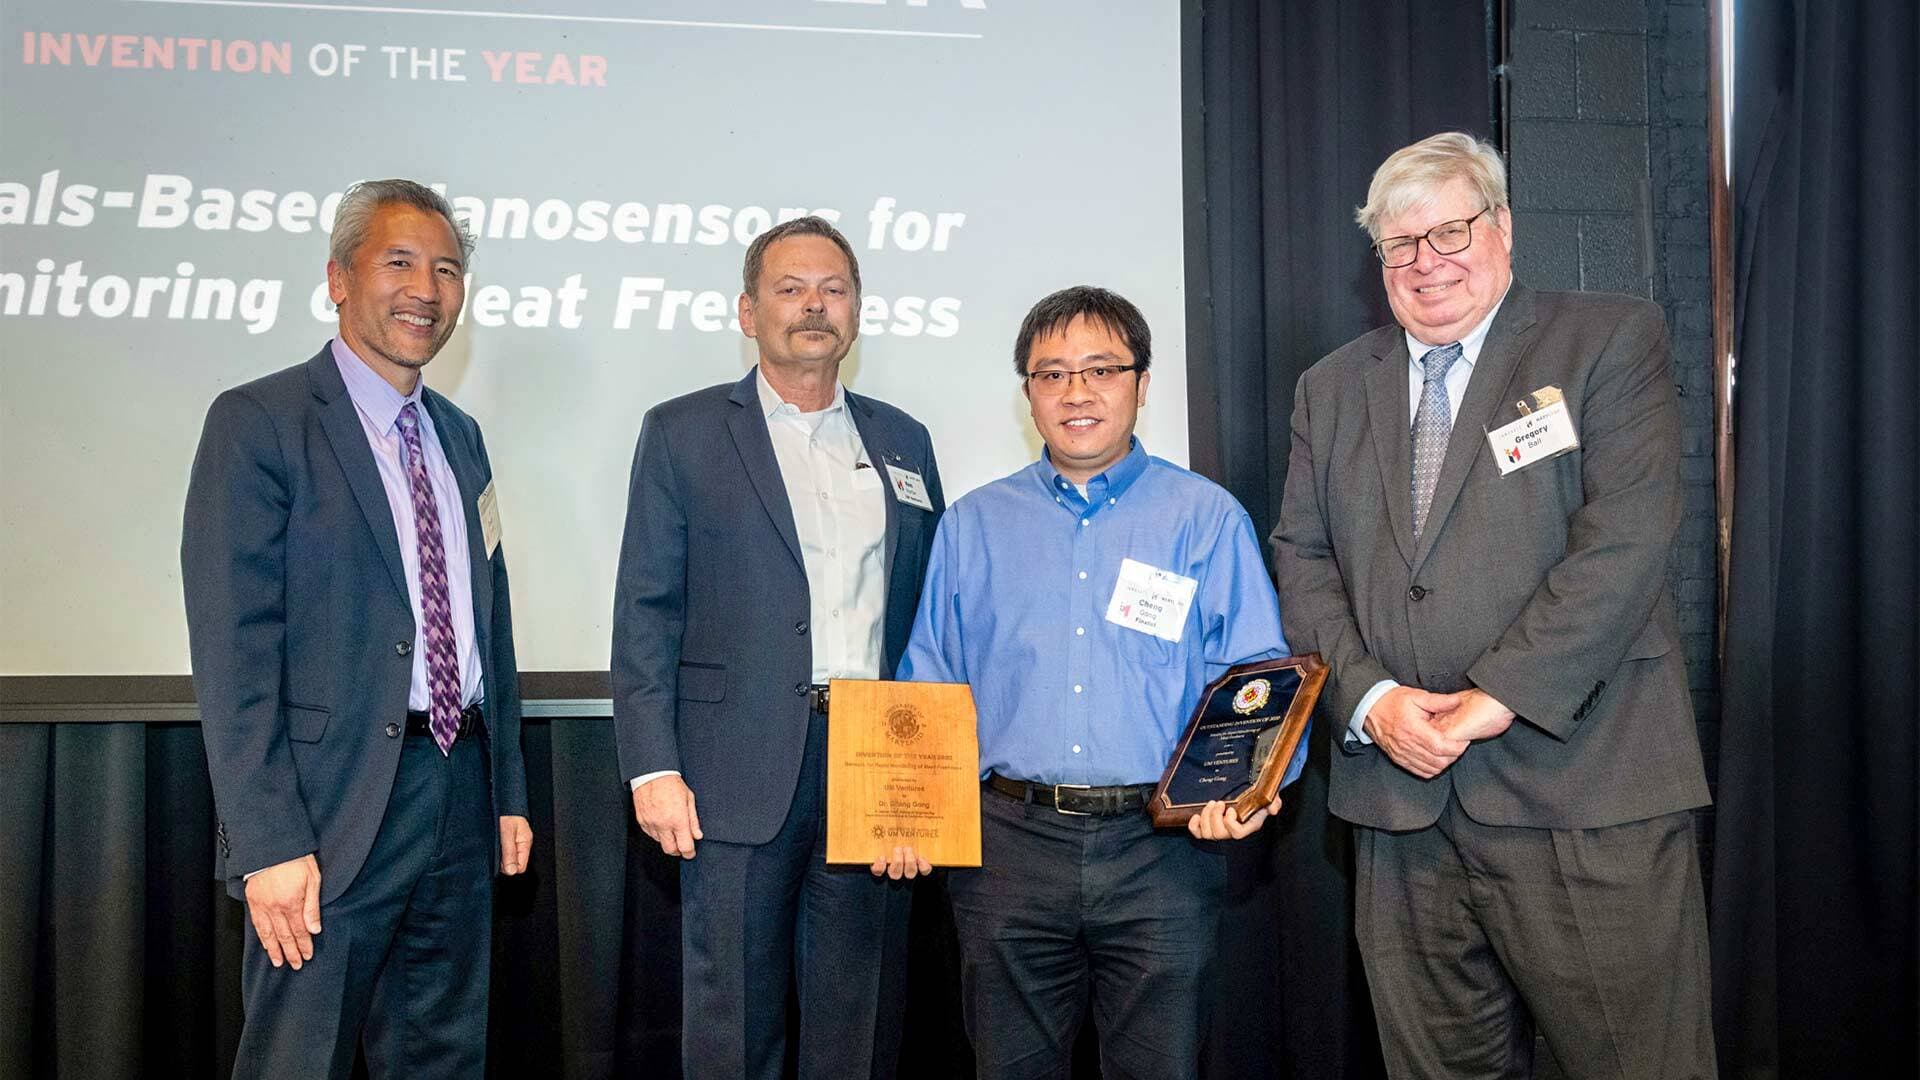 Winners on stage at Invention of the Year event